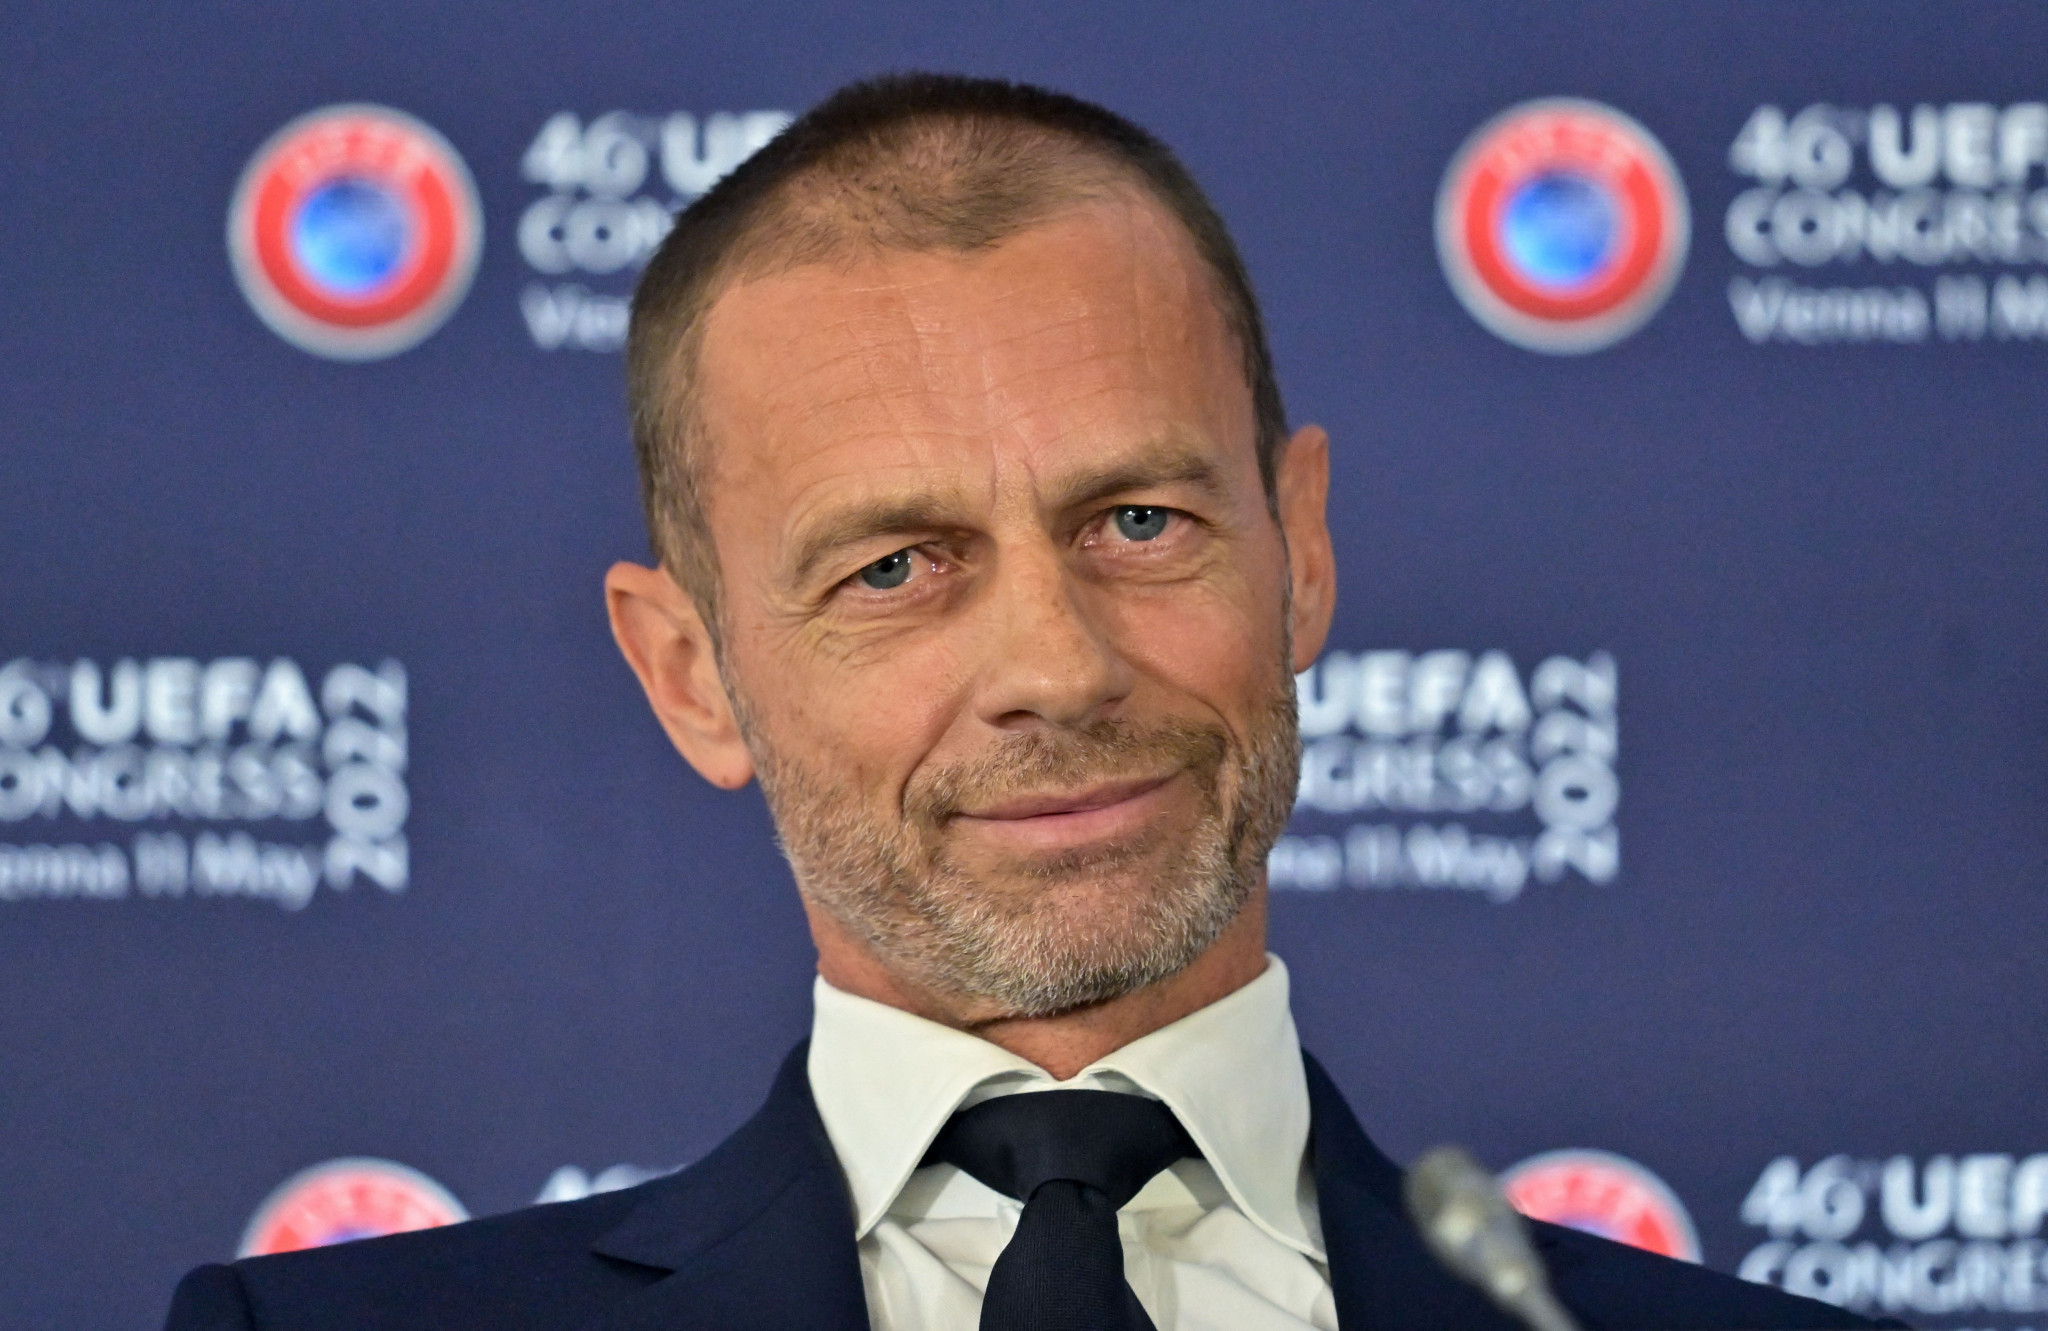 UEFA President Aleksander Čeferin said it was "premature" to suggest the Russian Football Union be suspended from the organisation ©Getty Images